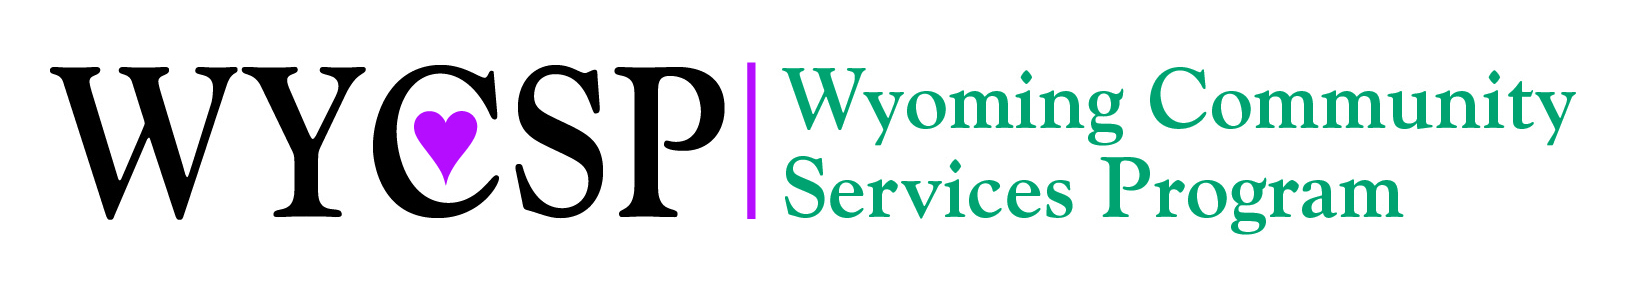 Letters: WYCSP with a pink heart in the middle of the C. The written words: Wyoming Community Services Program